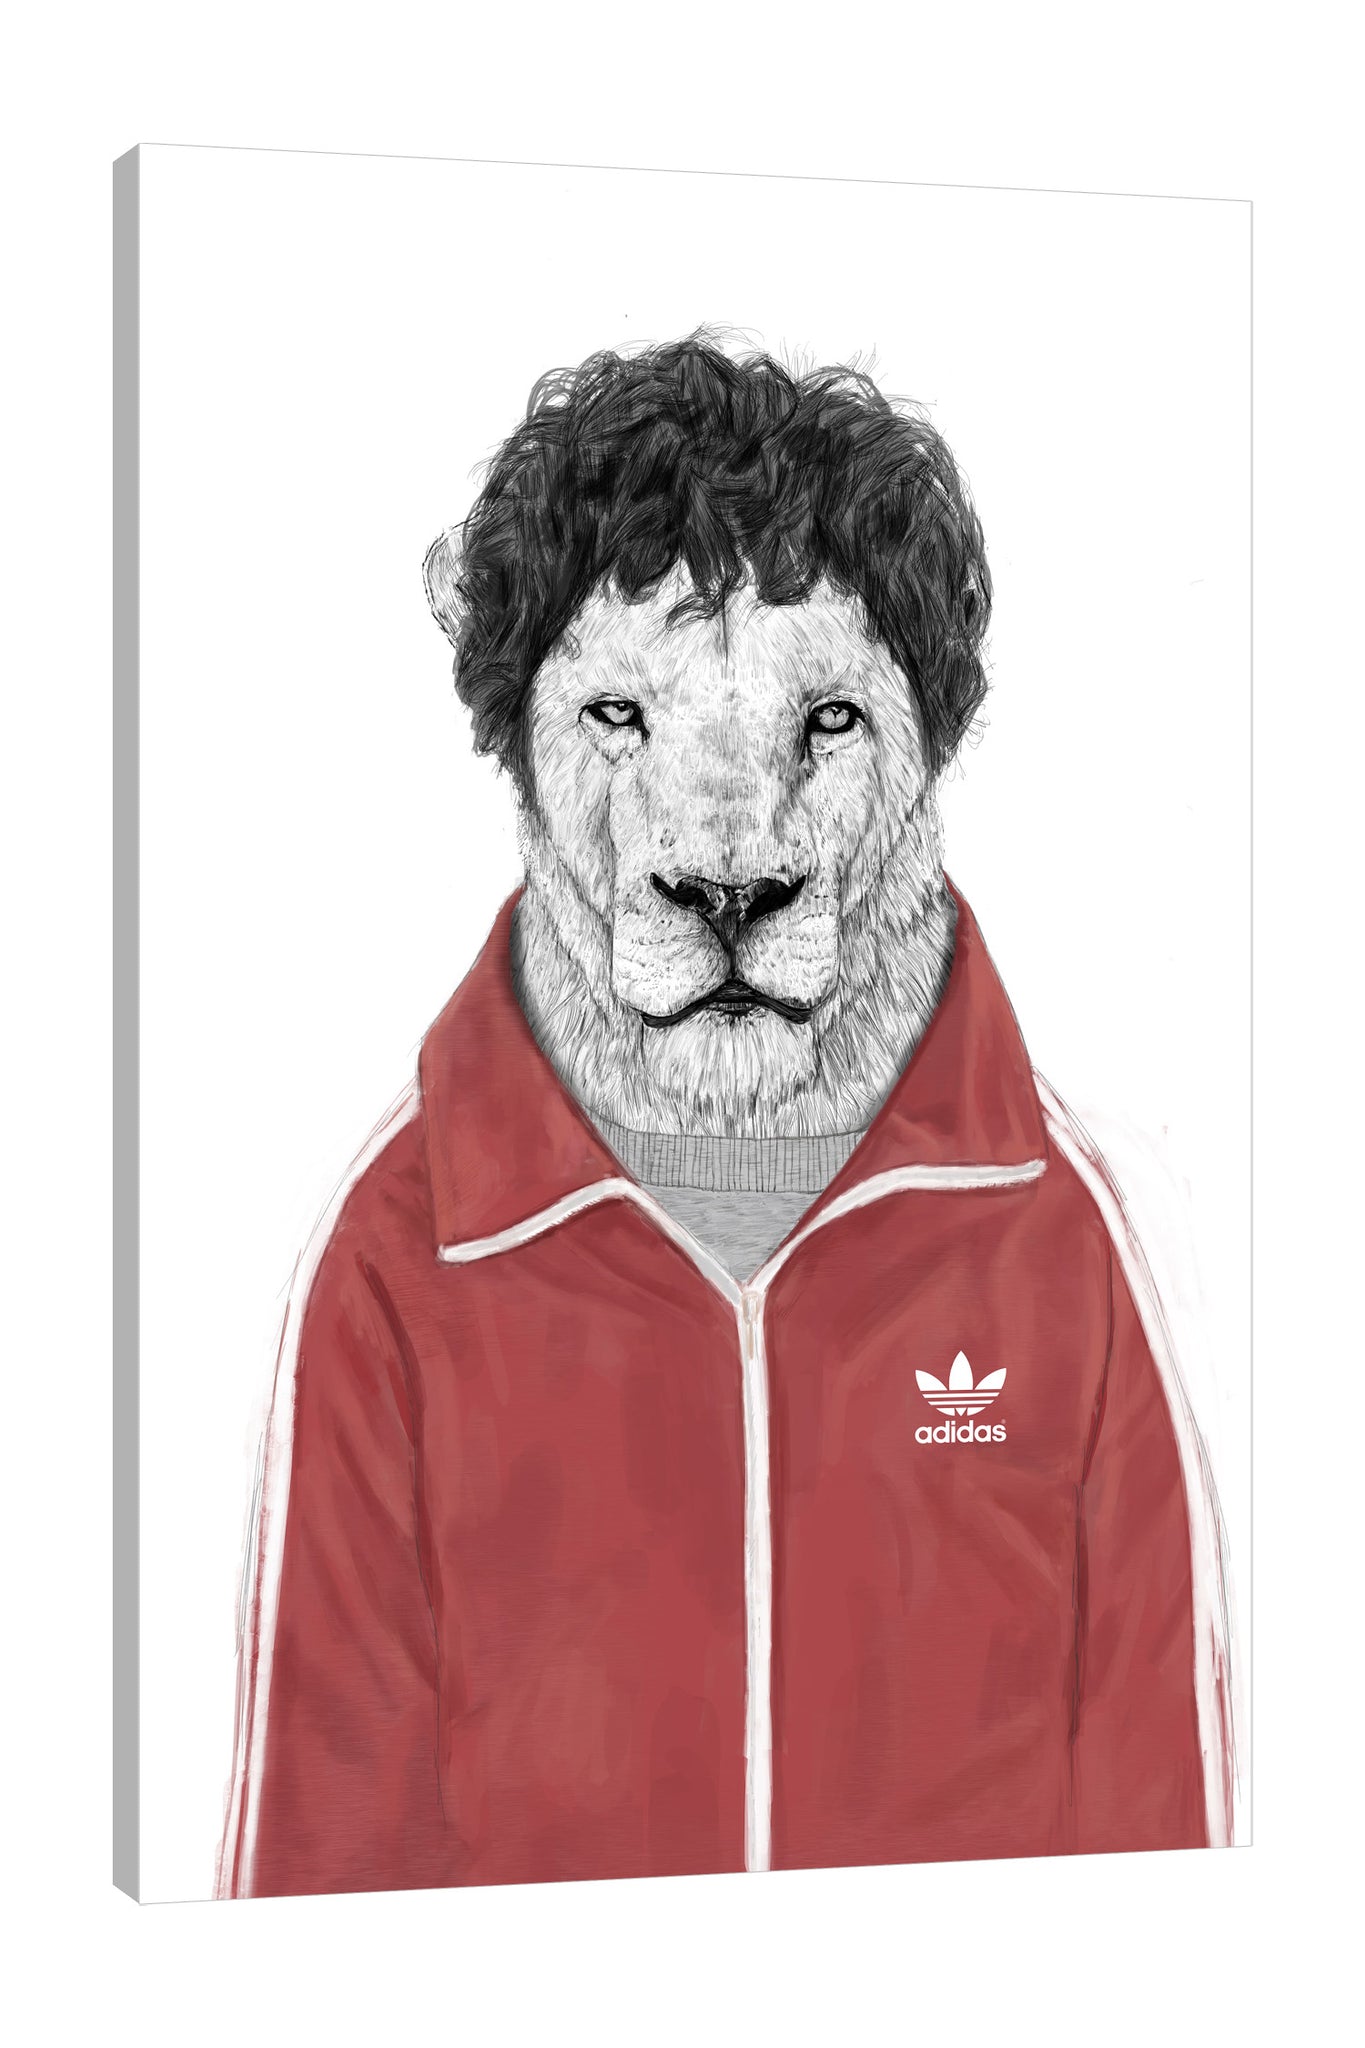 Balazs-Solti,Modern & Contemporary,Animals,Abstract,lion,lions,animals,animal,jacket,jackets,adidas,words,logo,,Purple,Mist Gray,Coral Pink,White